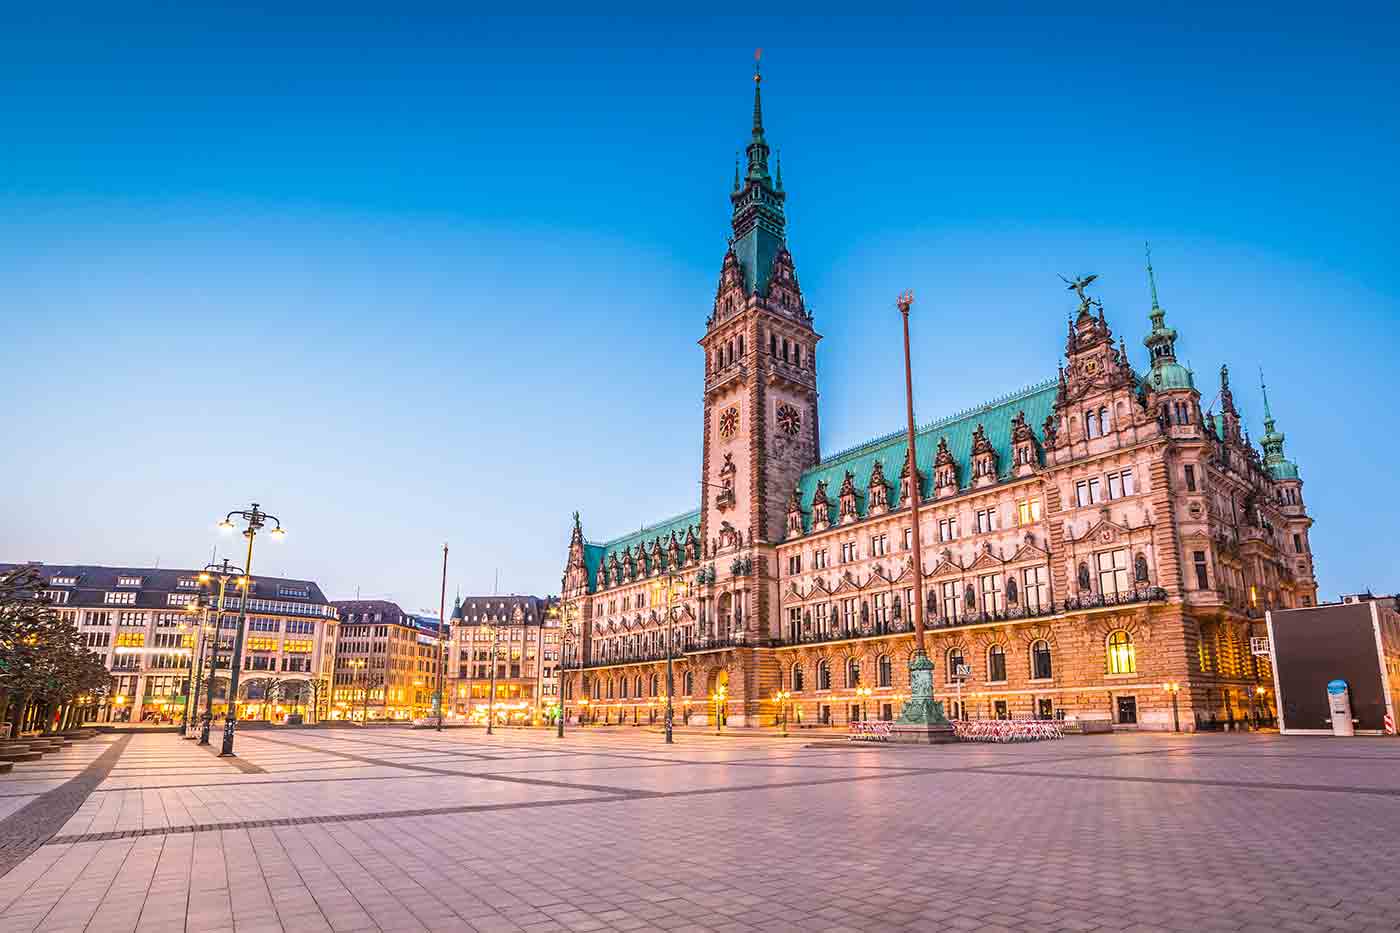 Sightseeing - Top 22 Things to Do & See in Hamburg, Germany